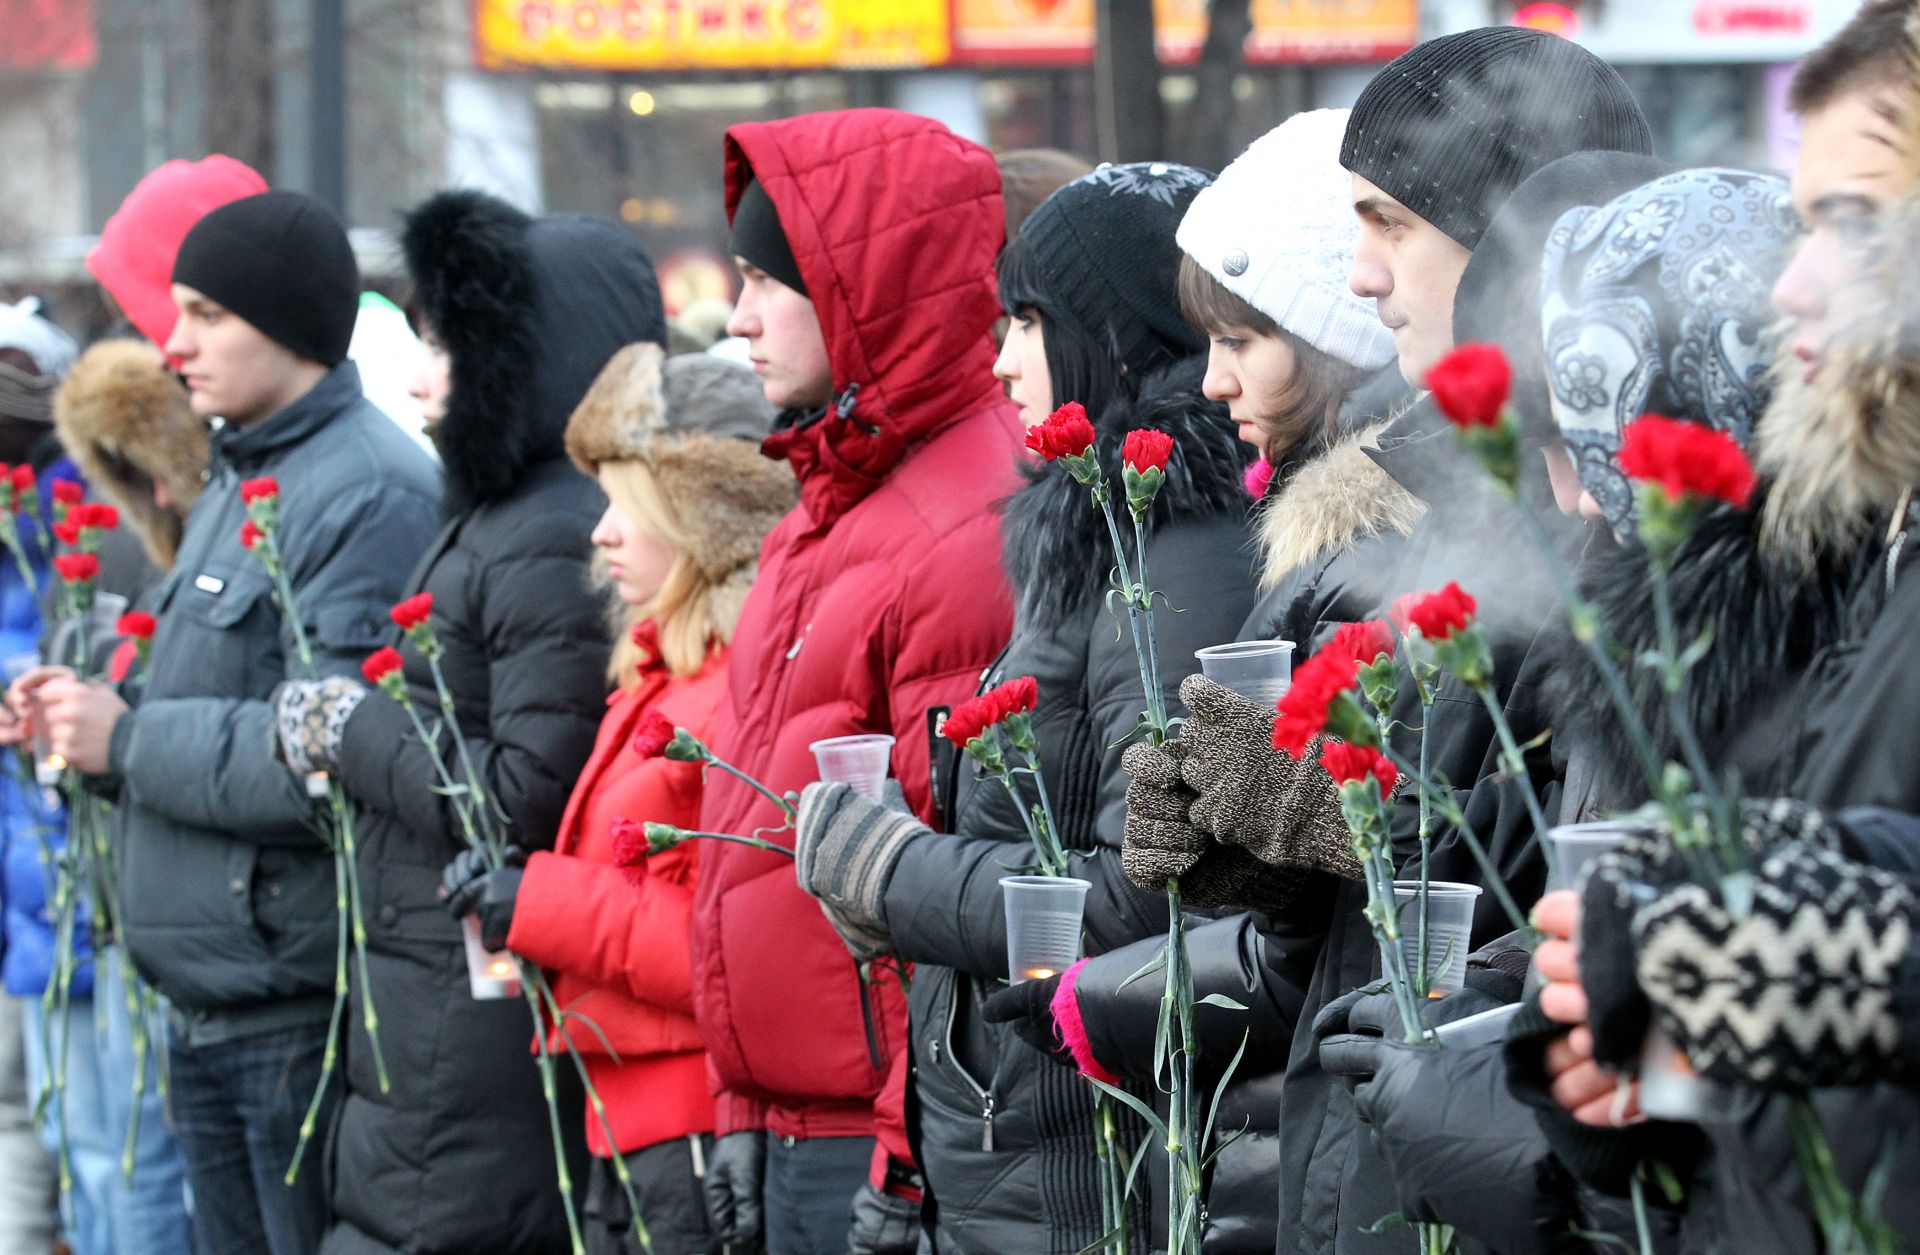 People hold flowers in central Moscow.